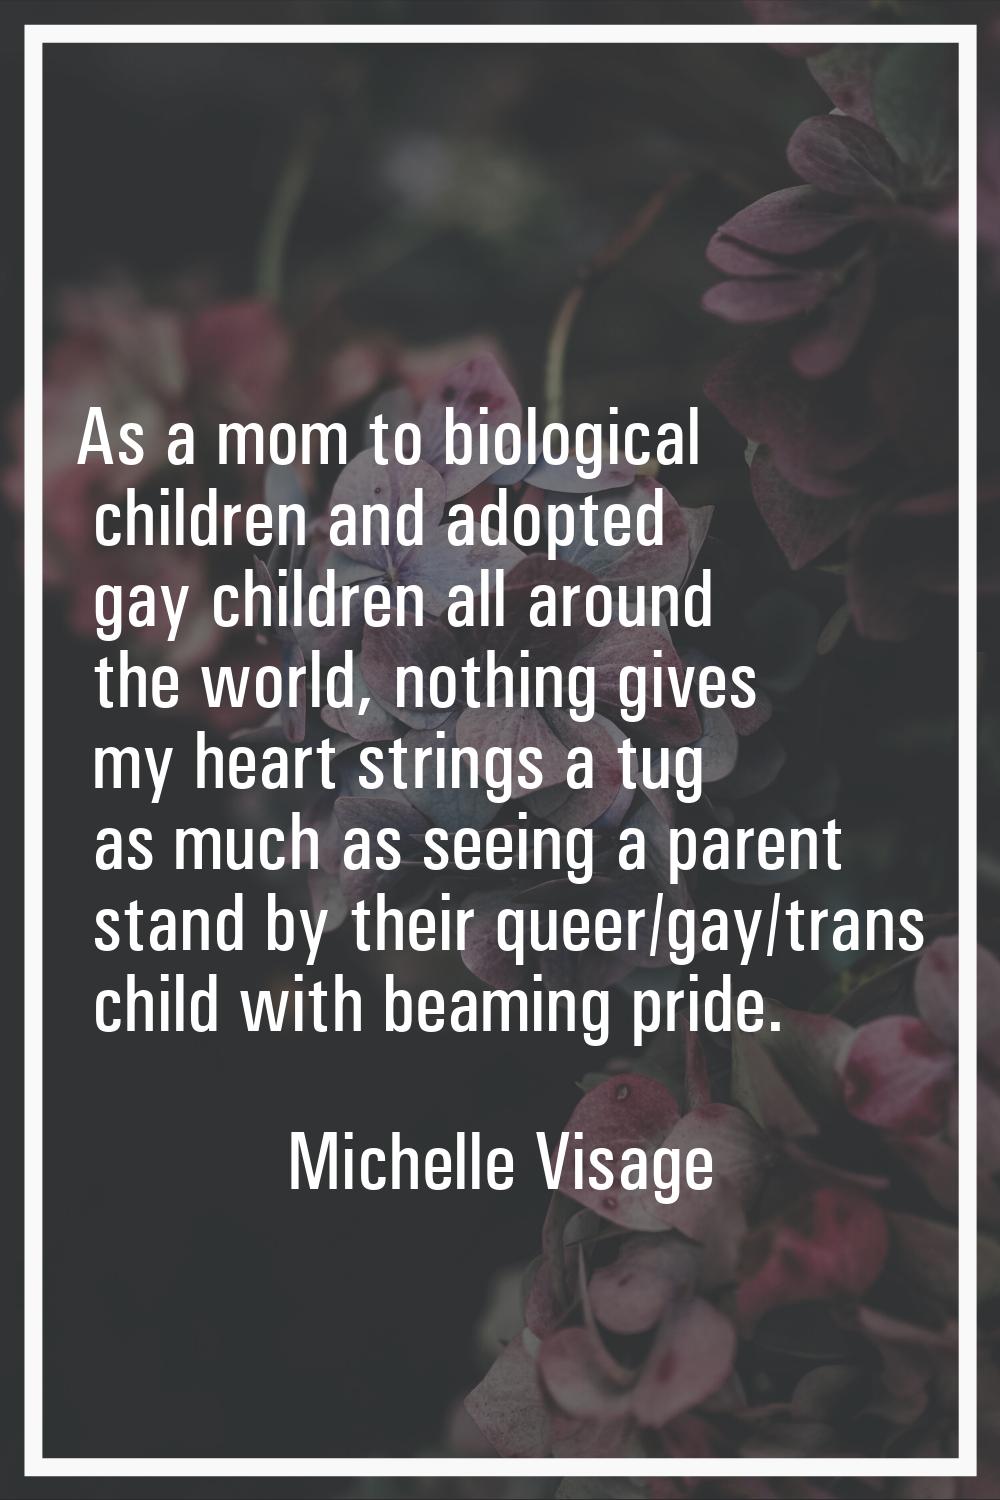 As a mom to biological children and adopted gay children all around the world, nothing gives my hea